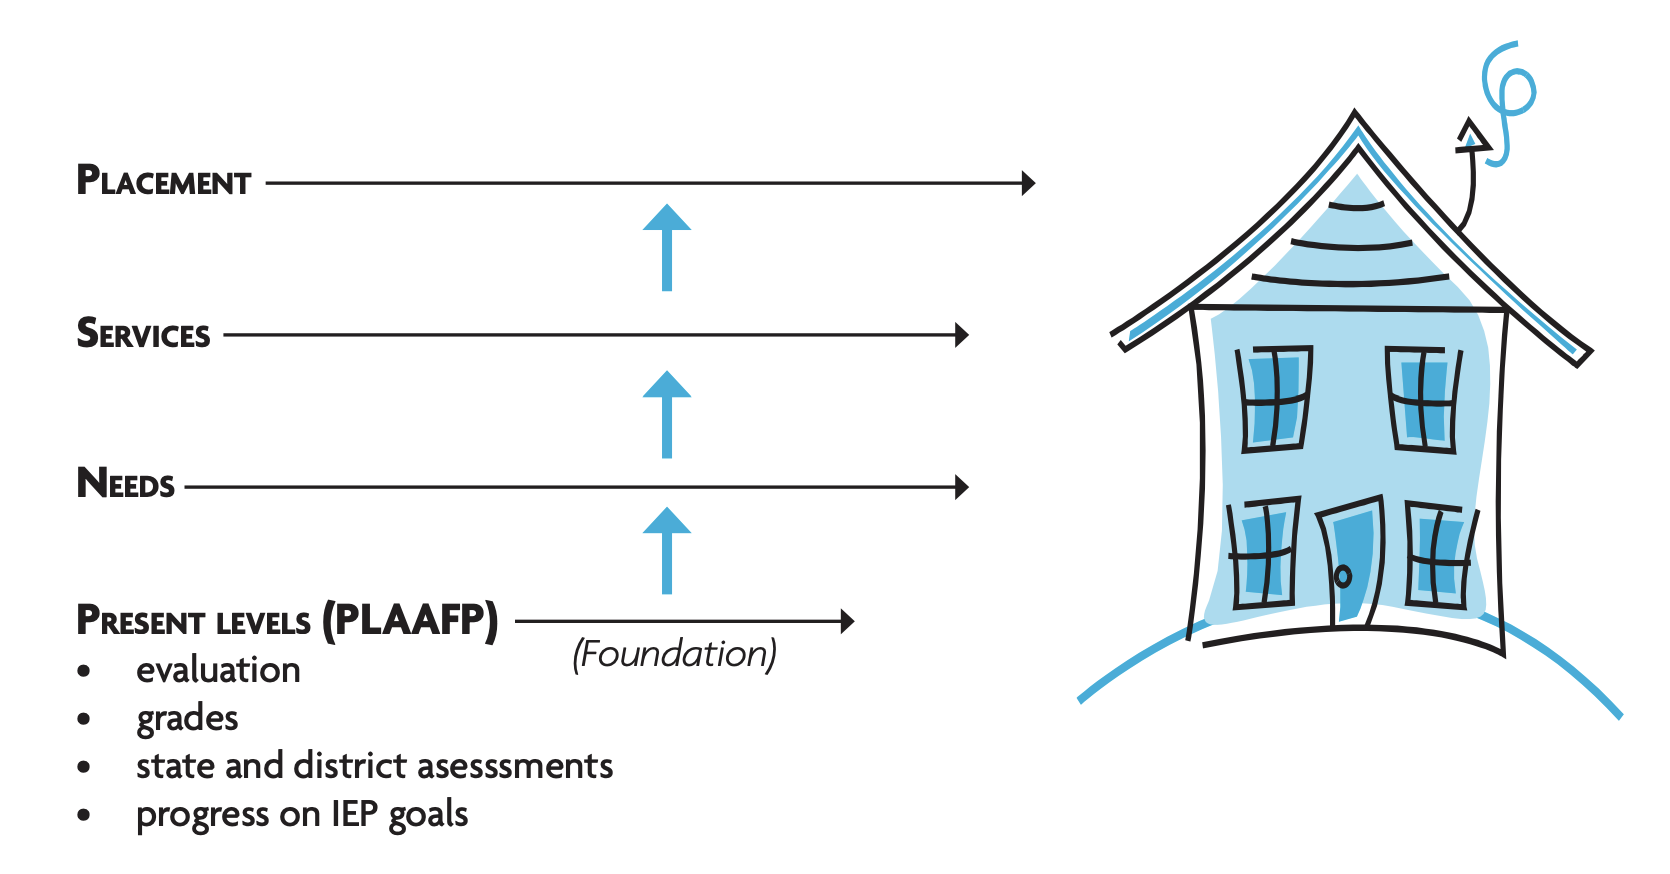 Image is a visualization of the house analogy. On the right is an illustration of a simple house, and on the left are labels of Present Levels PLAAFP (foundation), Needs (first floor), services (second floor), and placement (roof).